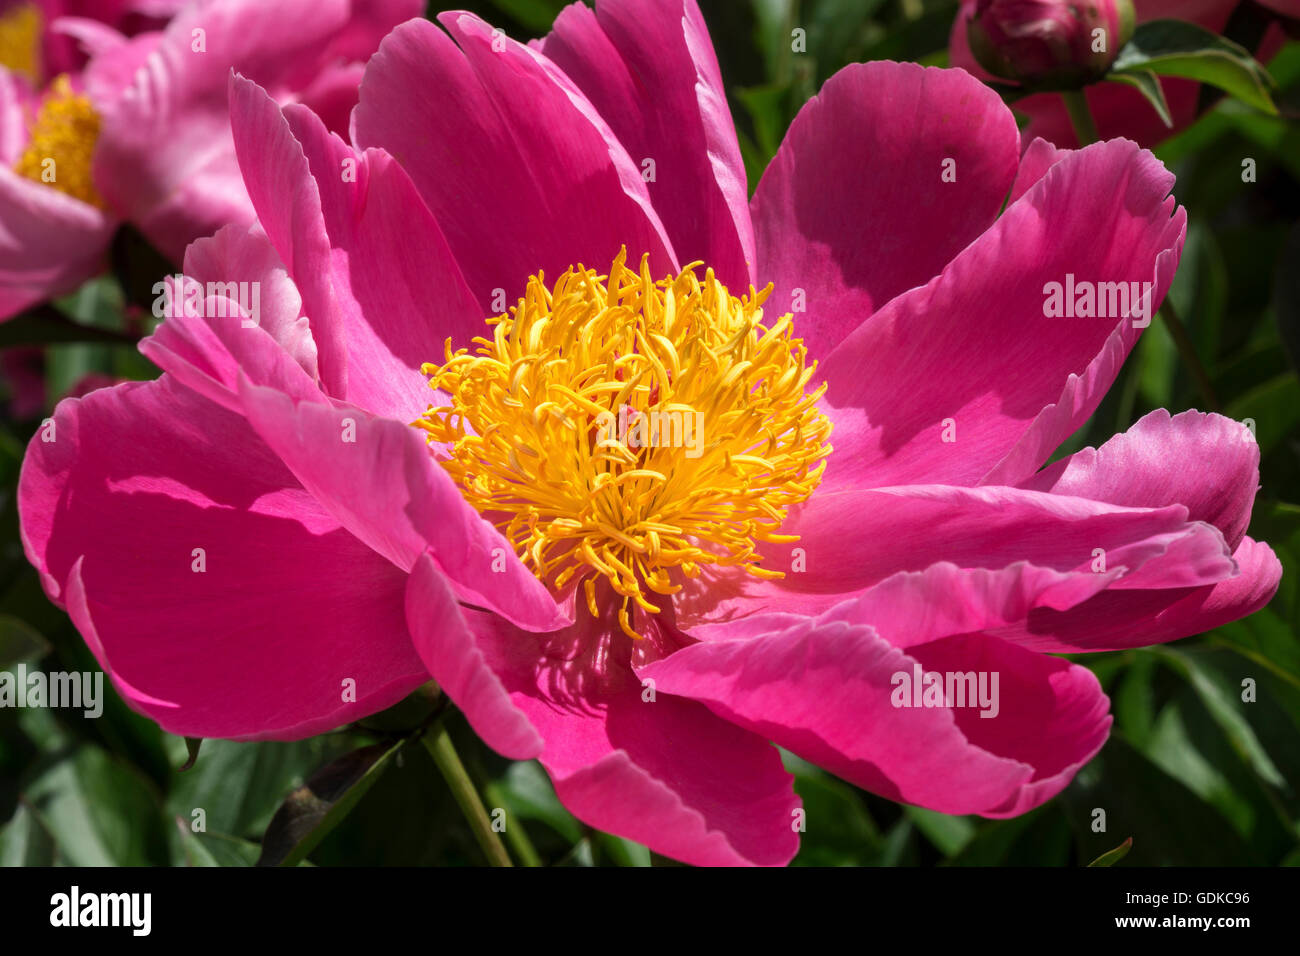 Common or garden peony (Paeonia officinalis), Baden-Württemberg, Germany Stock Photo